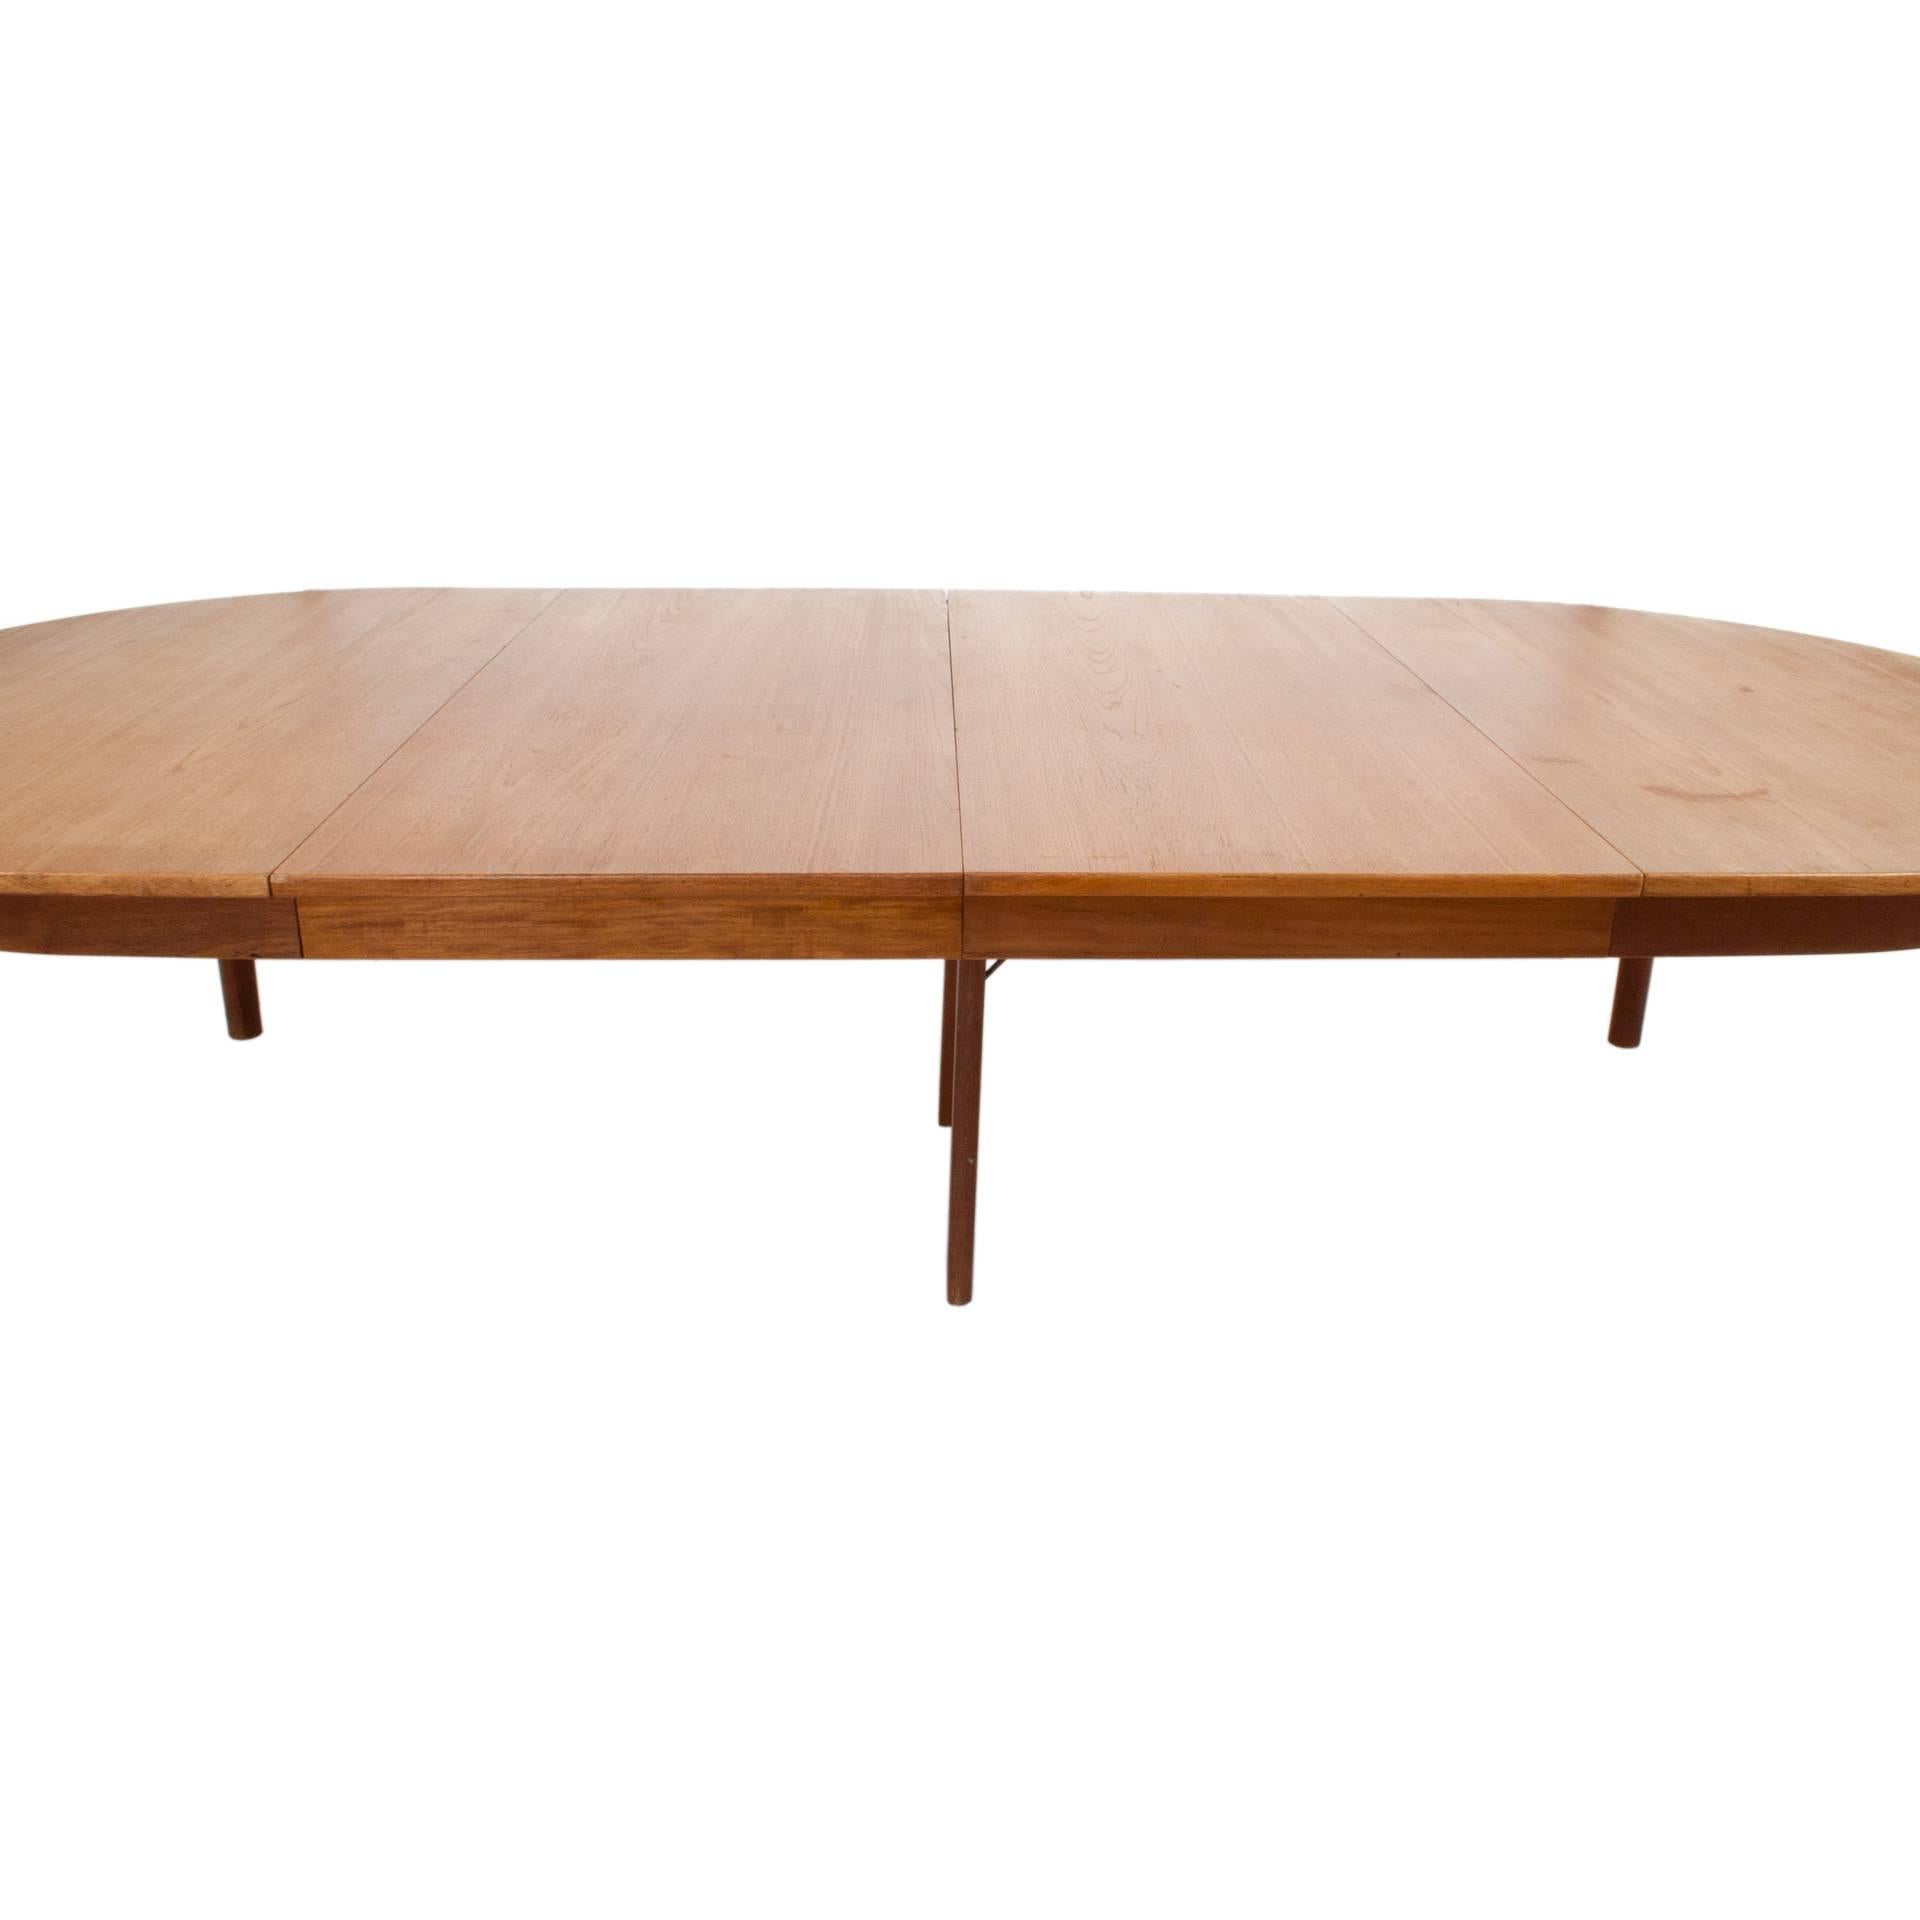 Dining table with four leafs in teak by Børge Mogensen.